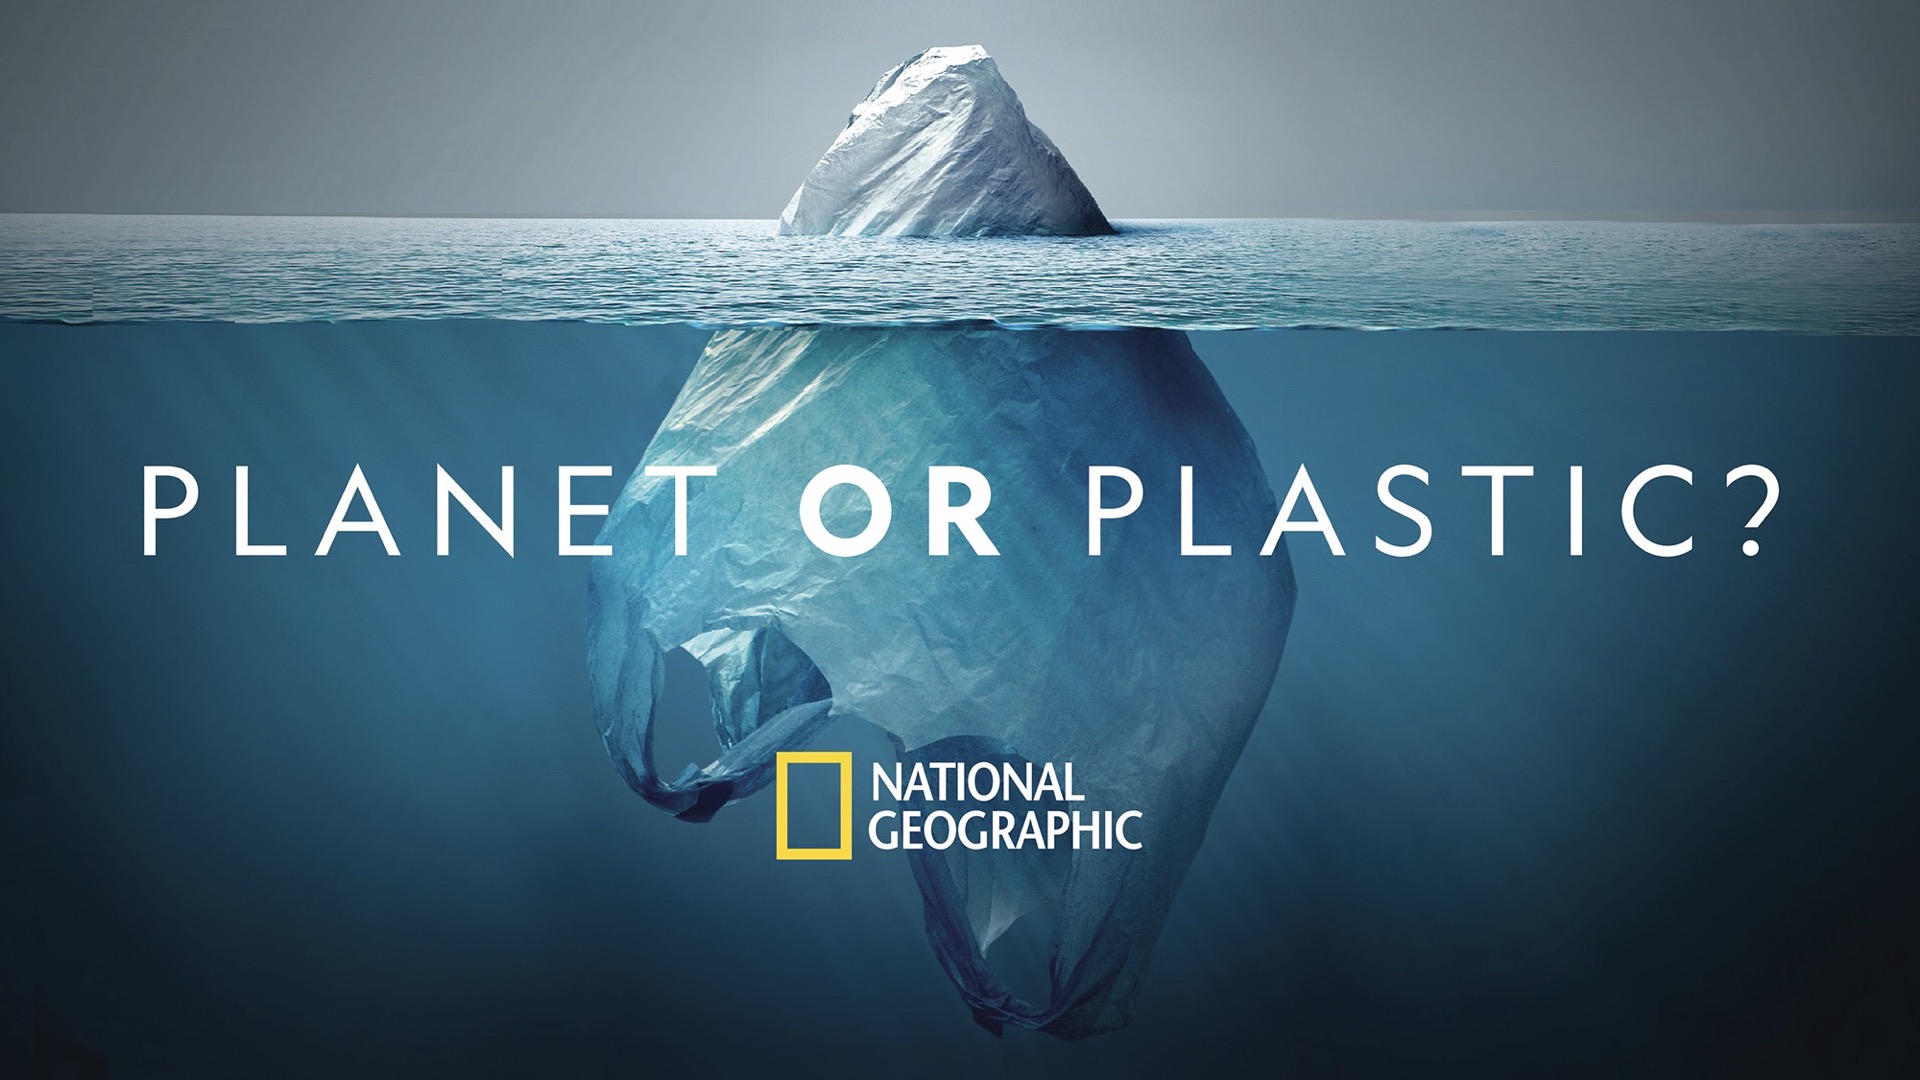 National Geographic | Planet or Plastic?